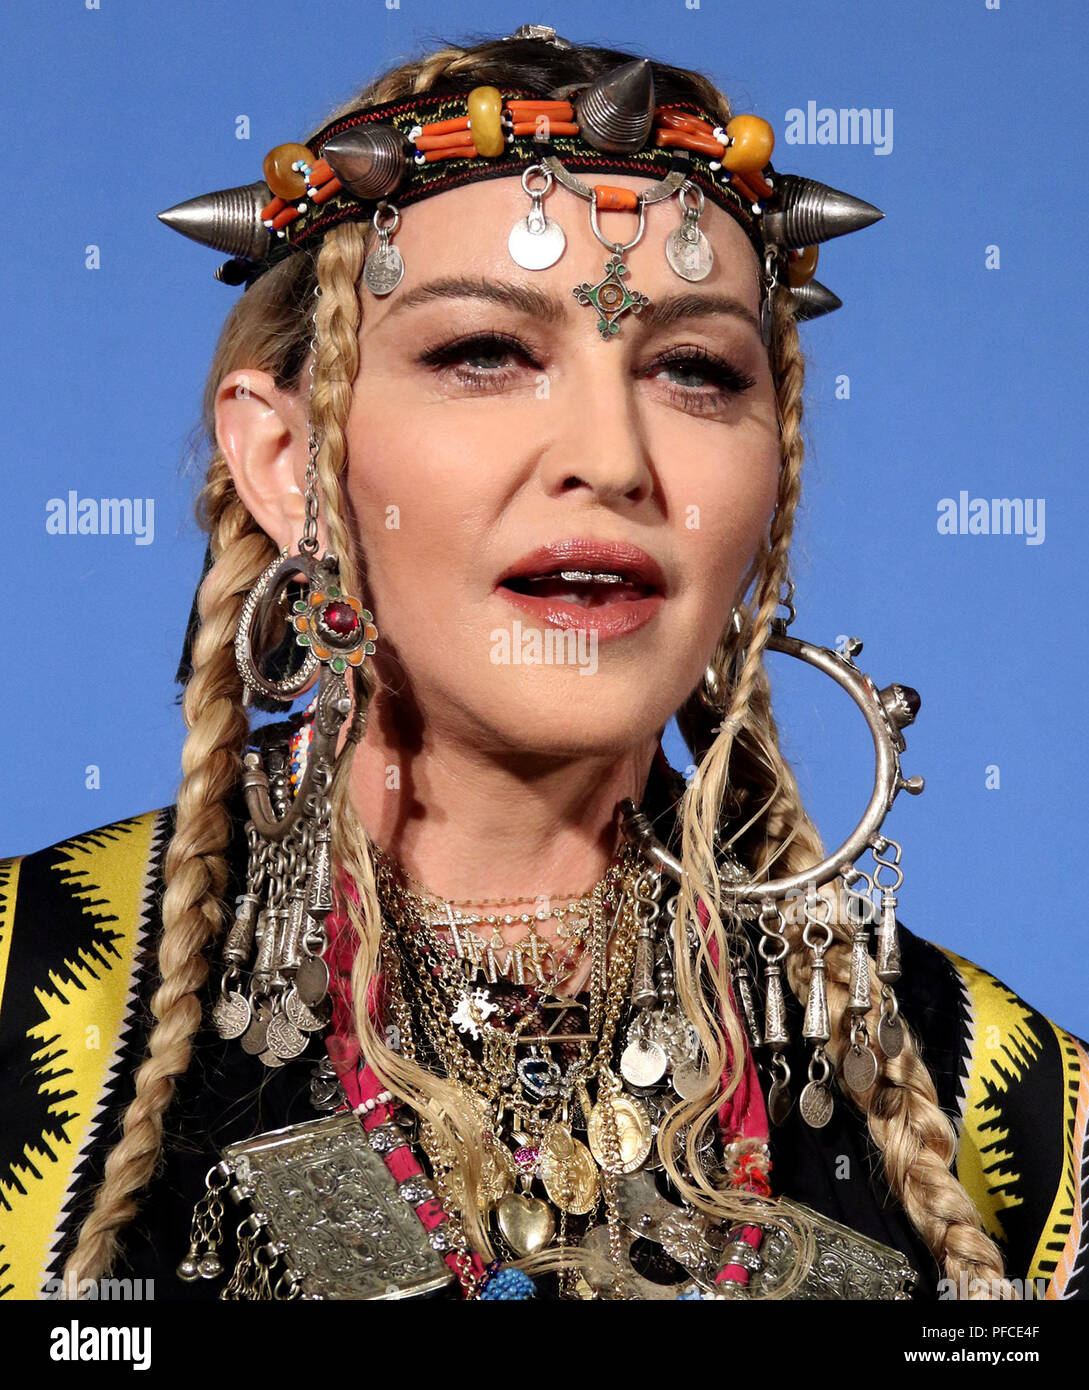 New York City, New York, USA. 20th Aug, 2018. Singer MADONNA poses for photos in the press room for the 2018 MTV 'VMAS' held at Radio City Music Hall. Credit: Nancy Kaszerman/ZUMA Wire/Alamy Live News Stock Photo